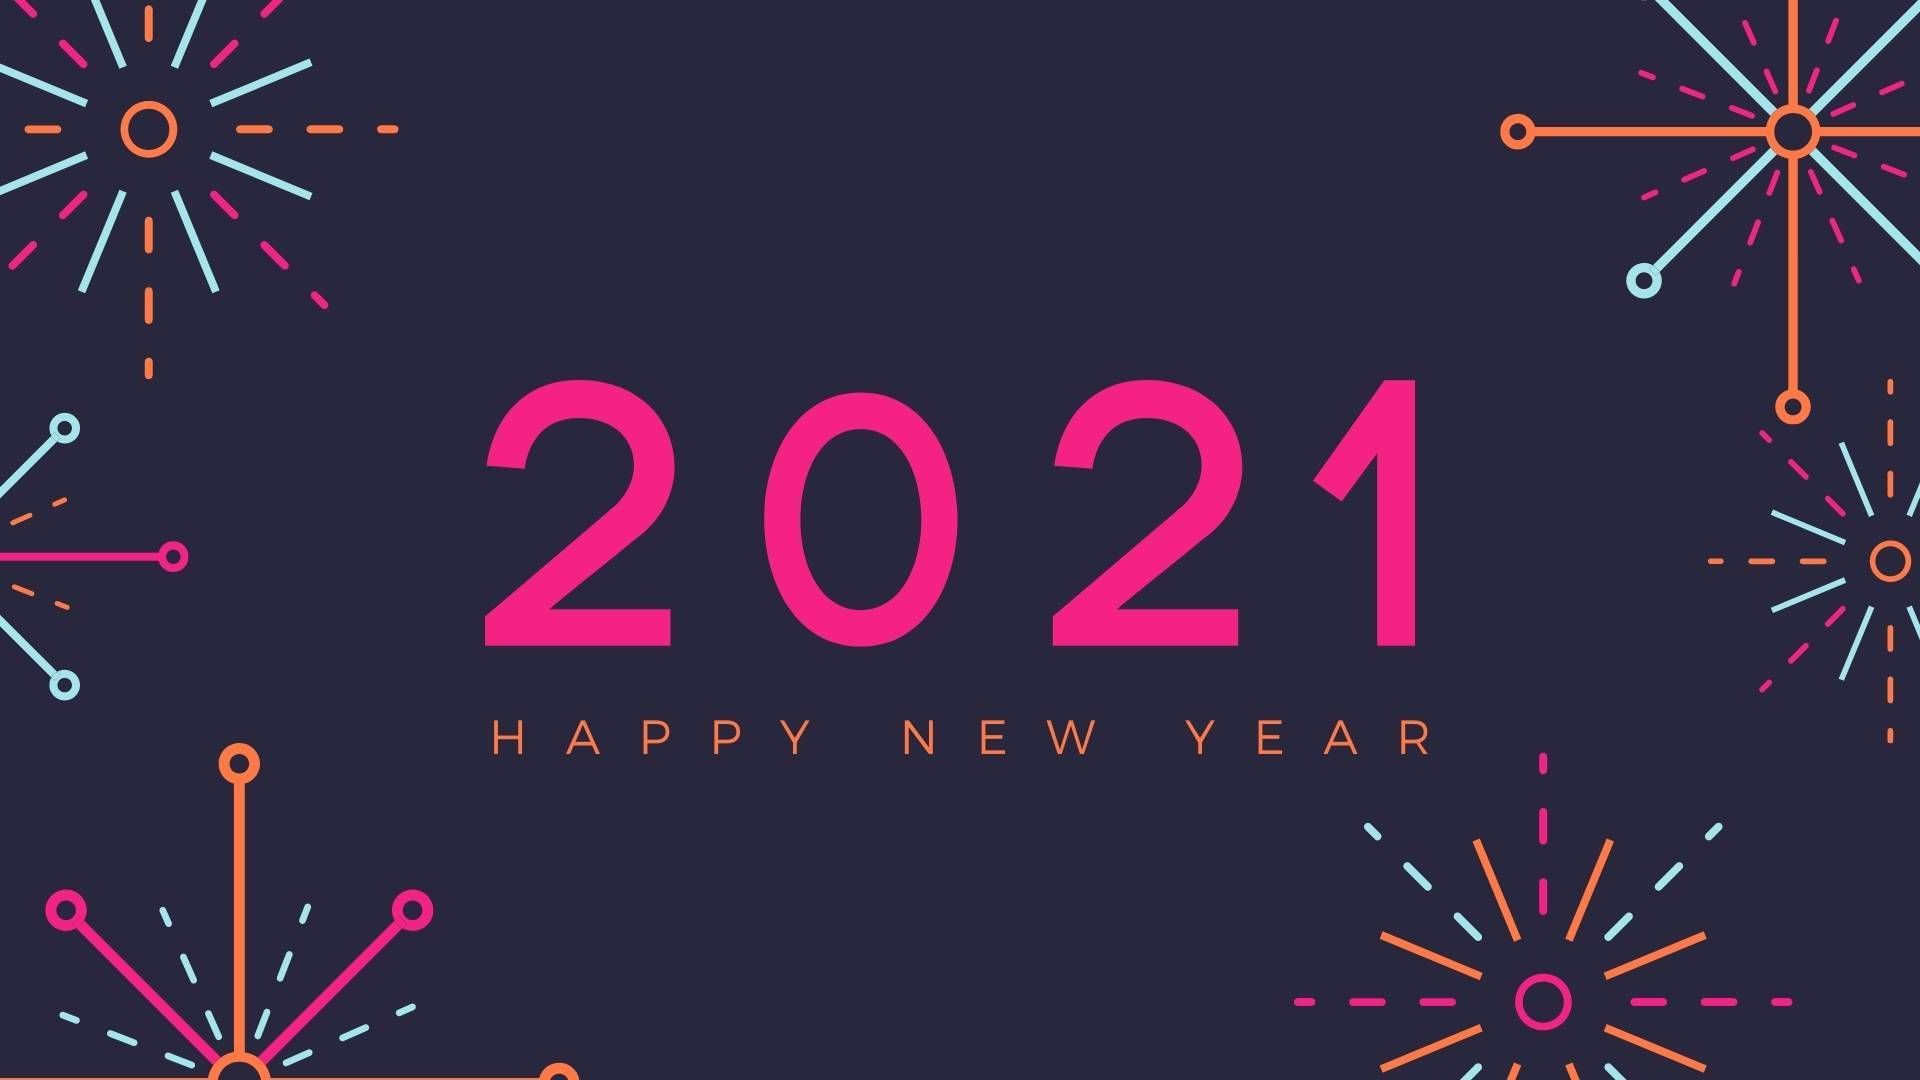 Happy New Year 2021 Wallpapers & HD Image